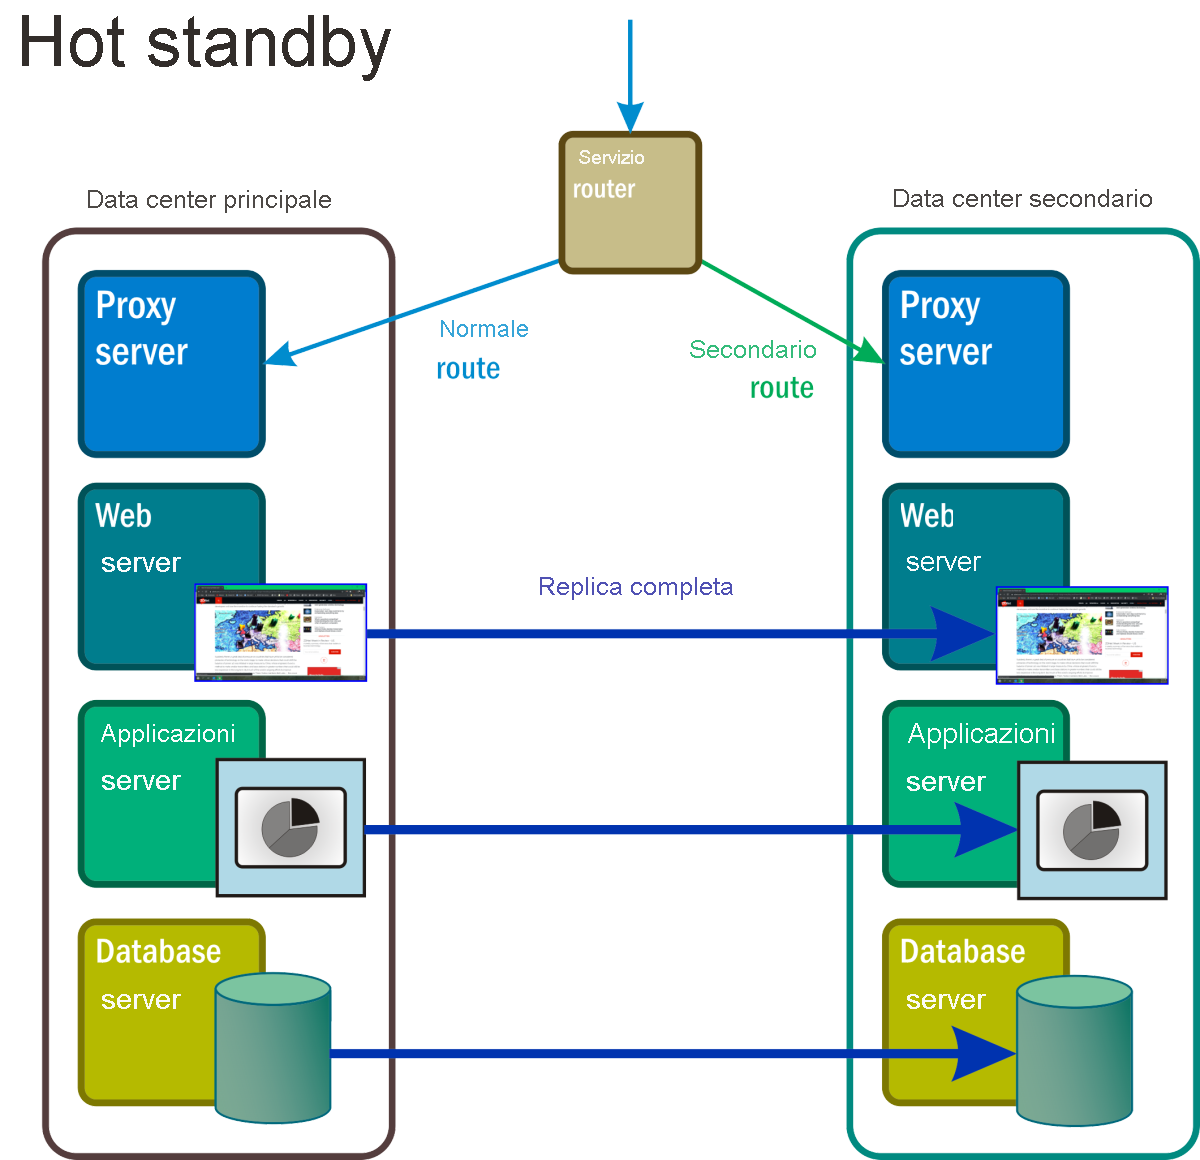 Figure 7: With Hot standby, all components in the namespace of what would normally have been the reserve, standby space, are active, fully operational, and processing replicas of the primary data in real time.